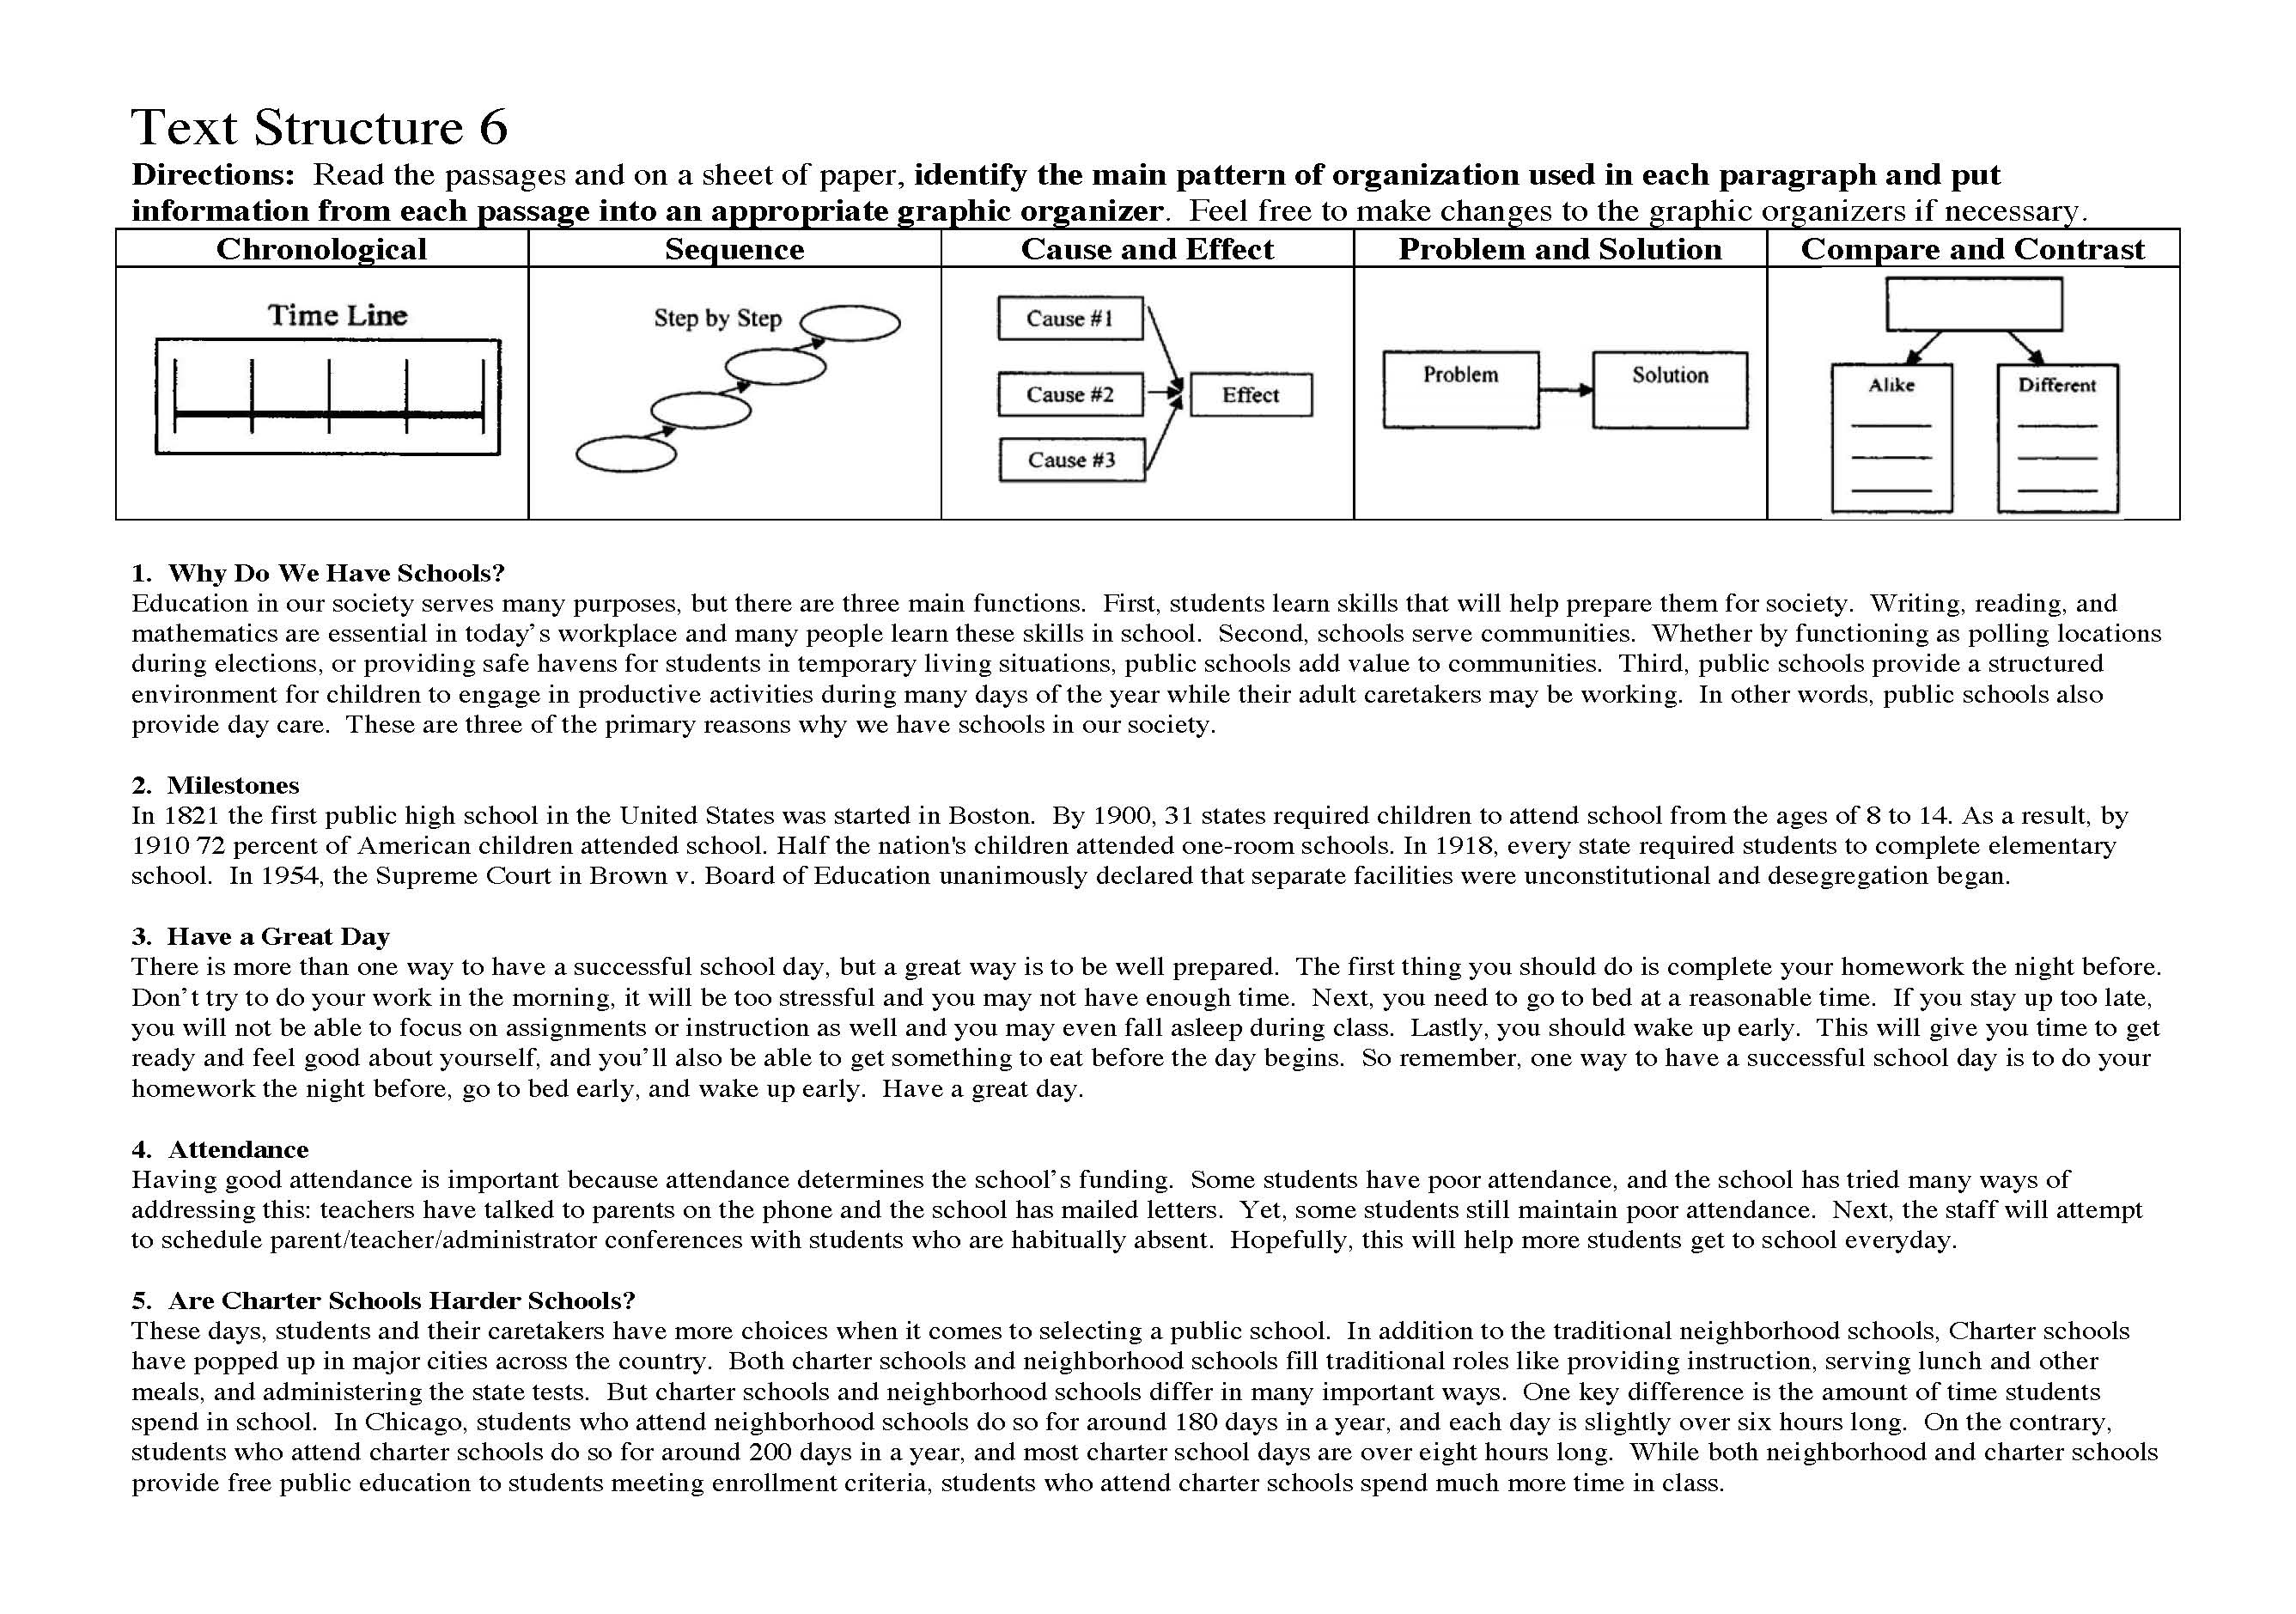 This is a preview image of the Text Structure Worksheet 6.